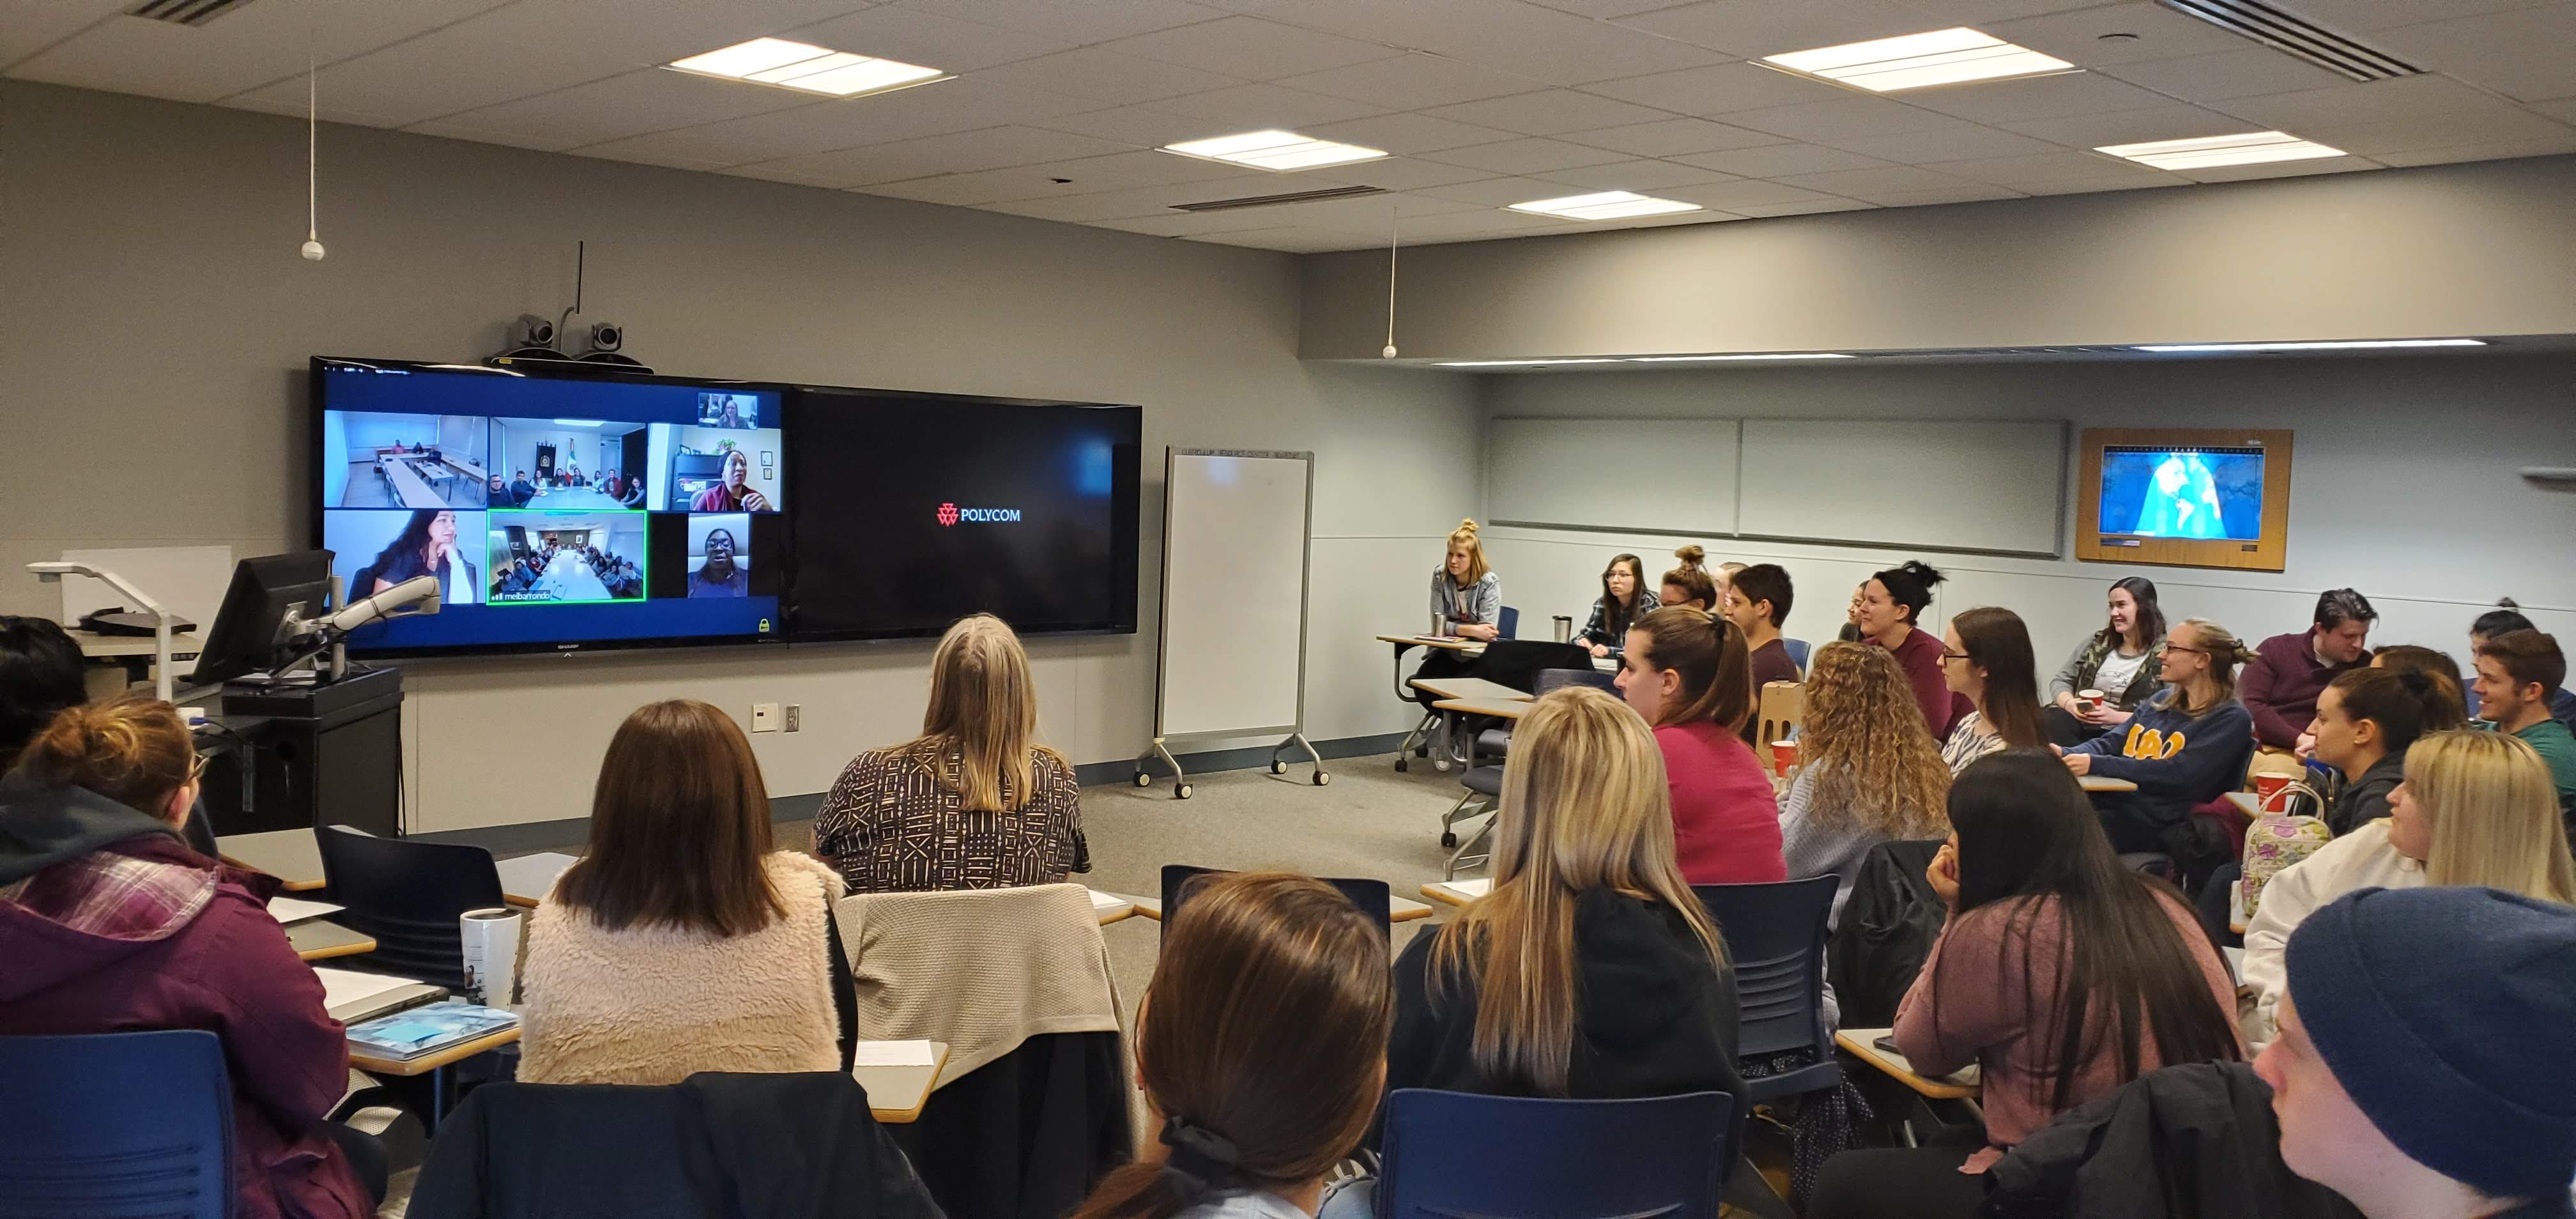 Global Crossroads classroom with students in the room and on screen